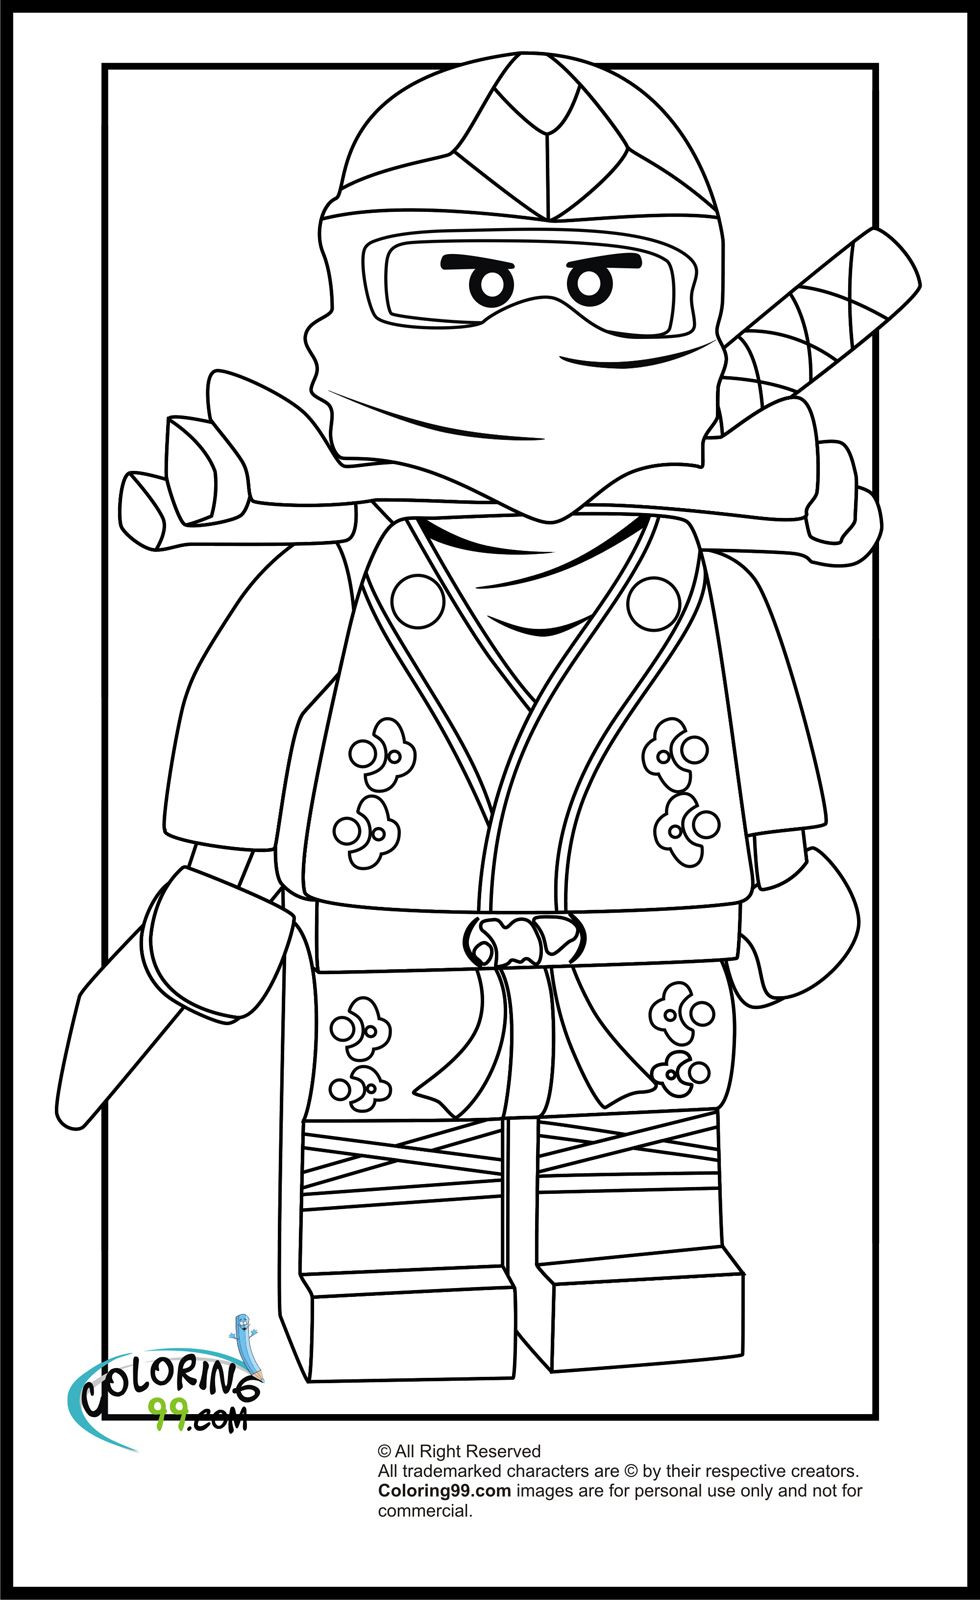 Top 30 Coloring Pages for Boys Lego Ninjago - Home, Family, Style and ...